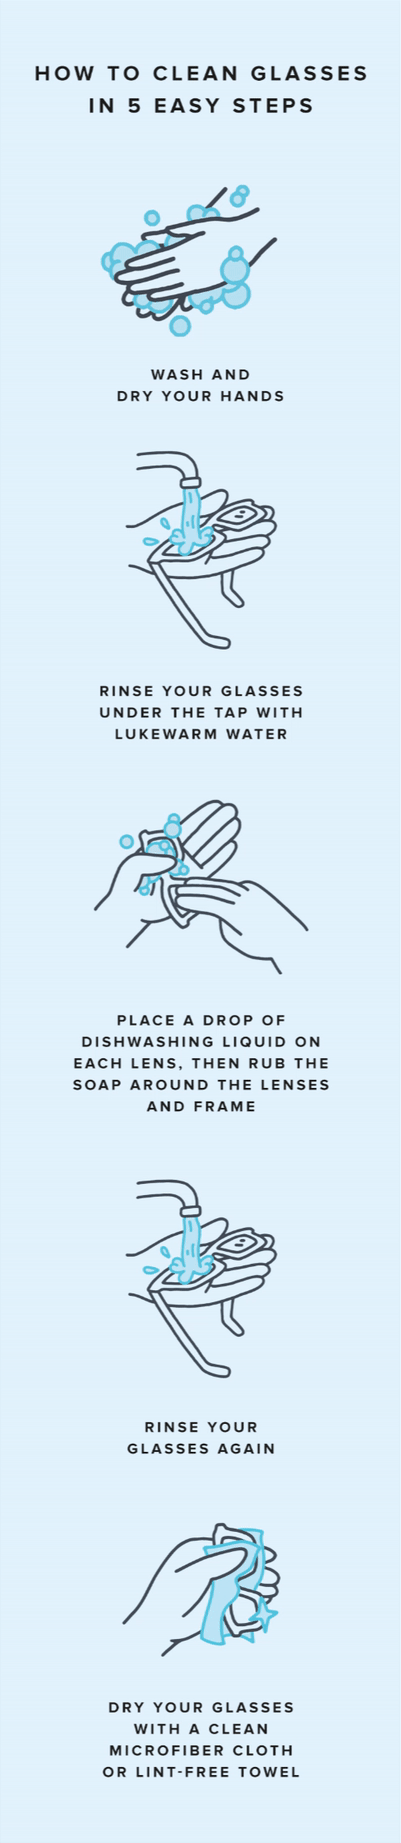 https://www.warbyparker.com/learn/wp-content/uploads/2022/04/how-to-clean-glasses-instructions-m.gif